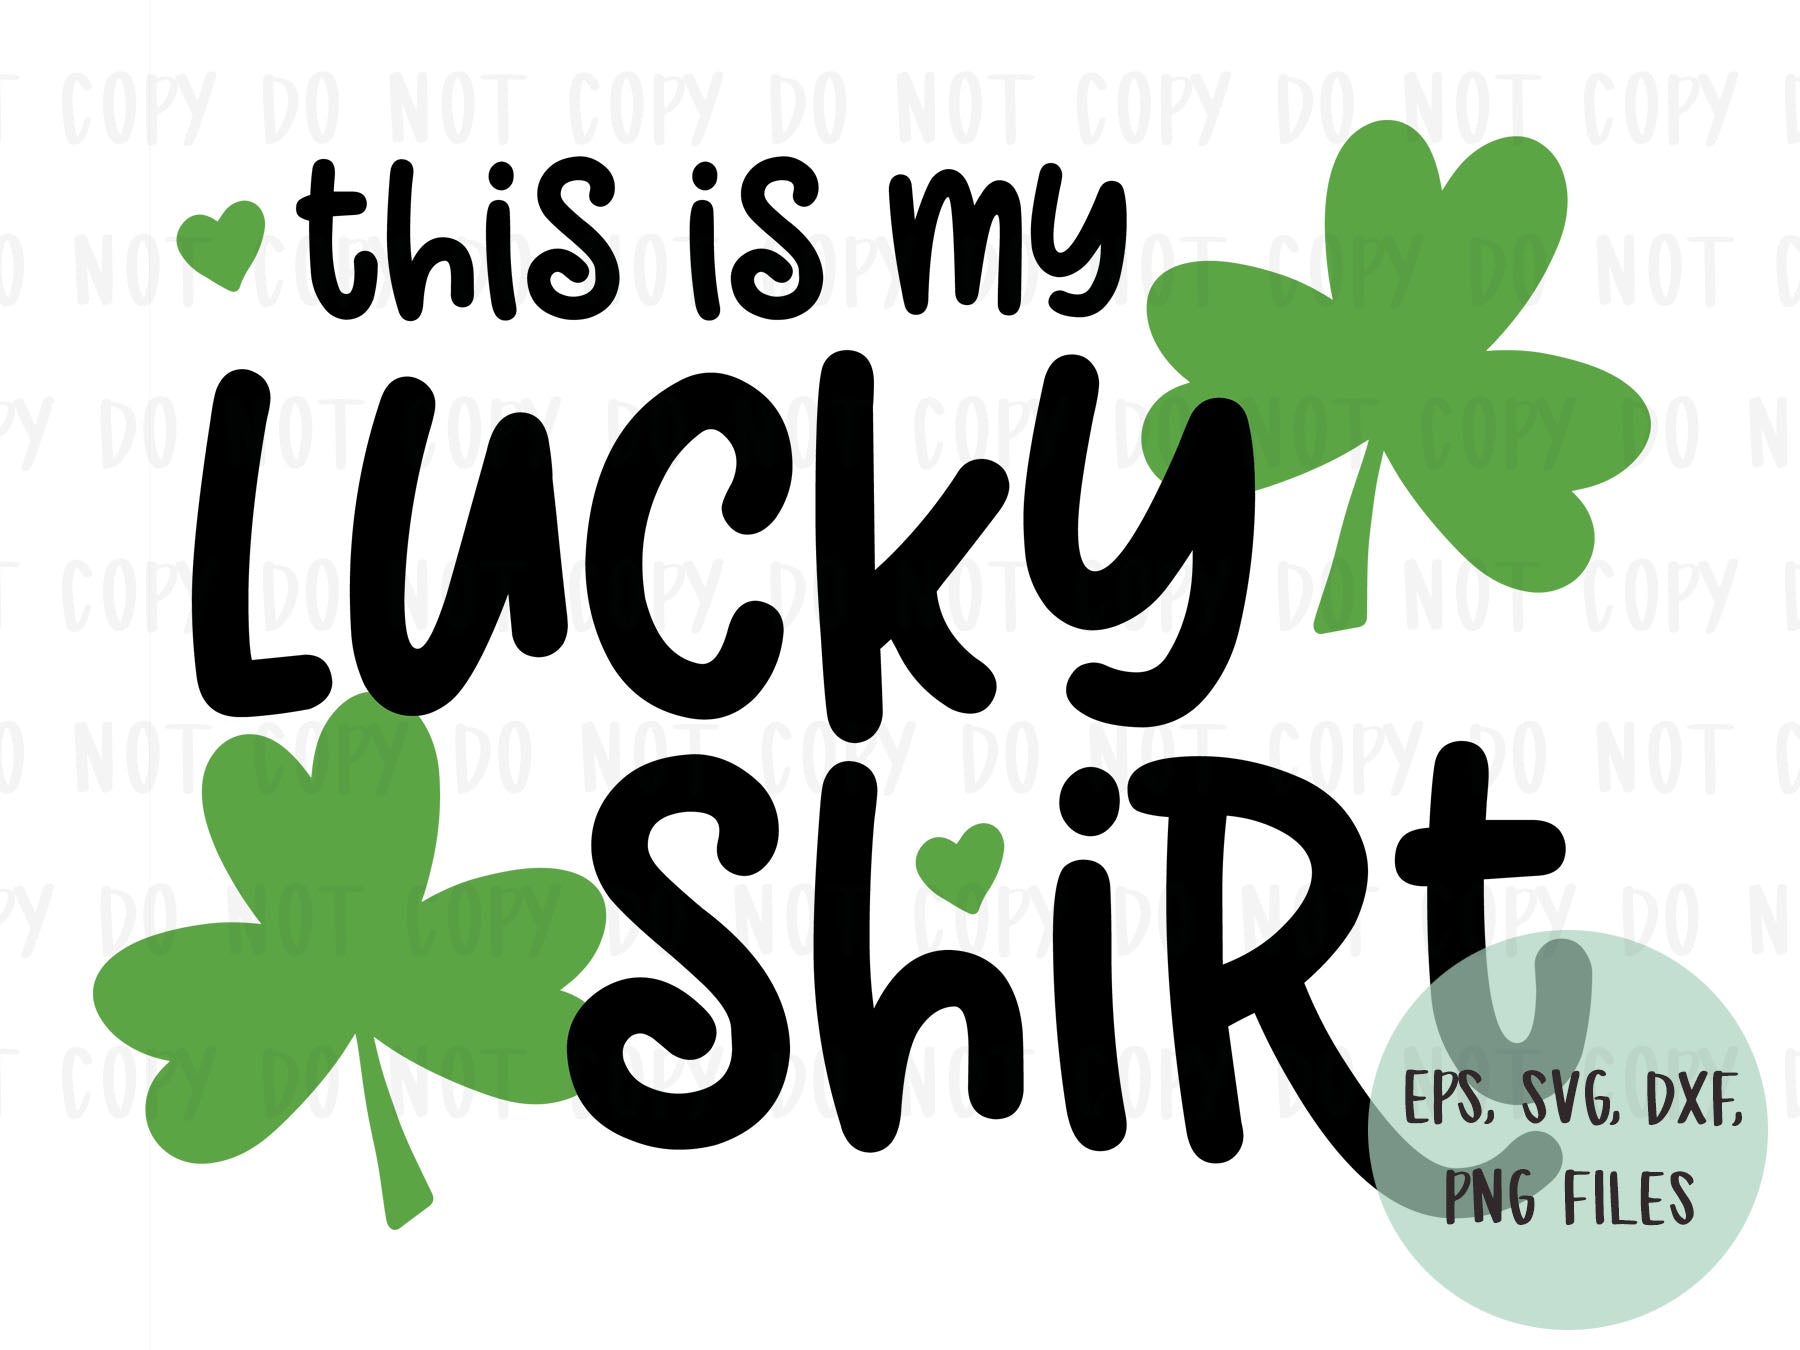 Download This Is My Lucky Shirt Design File Dxf Eps Png Svg Perfect For Howdoesshe